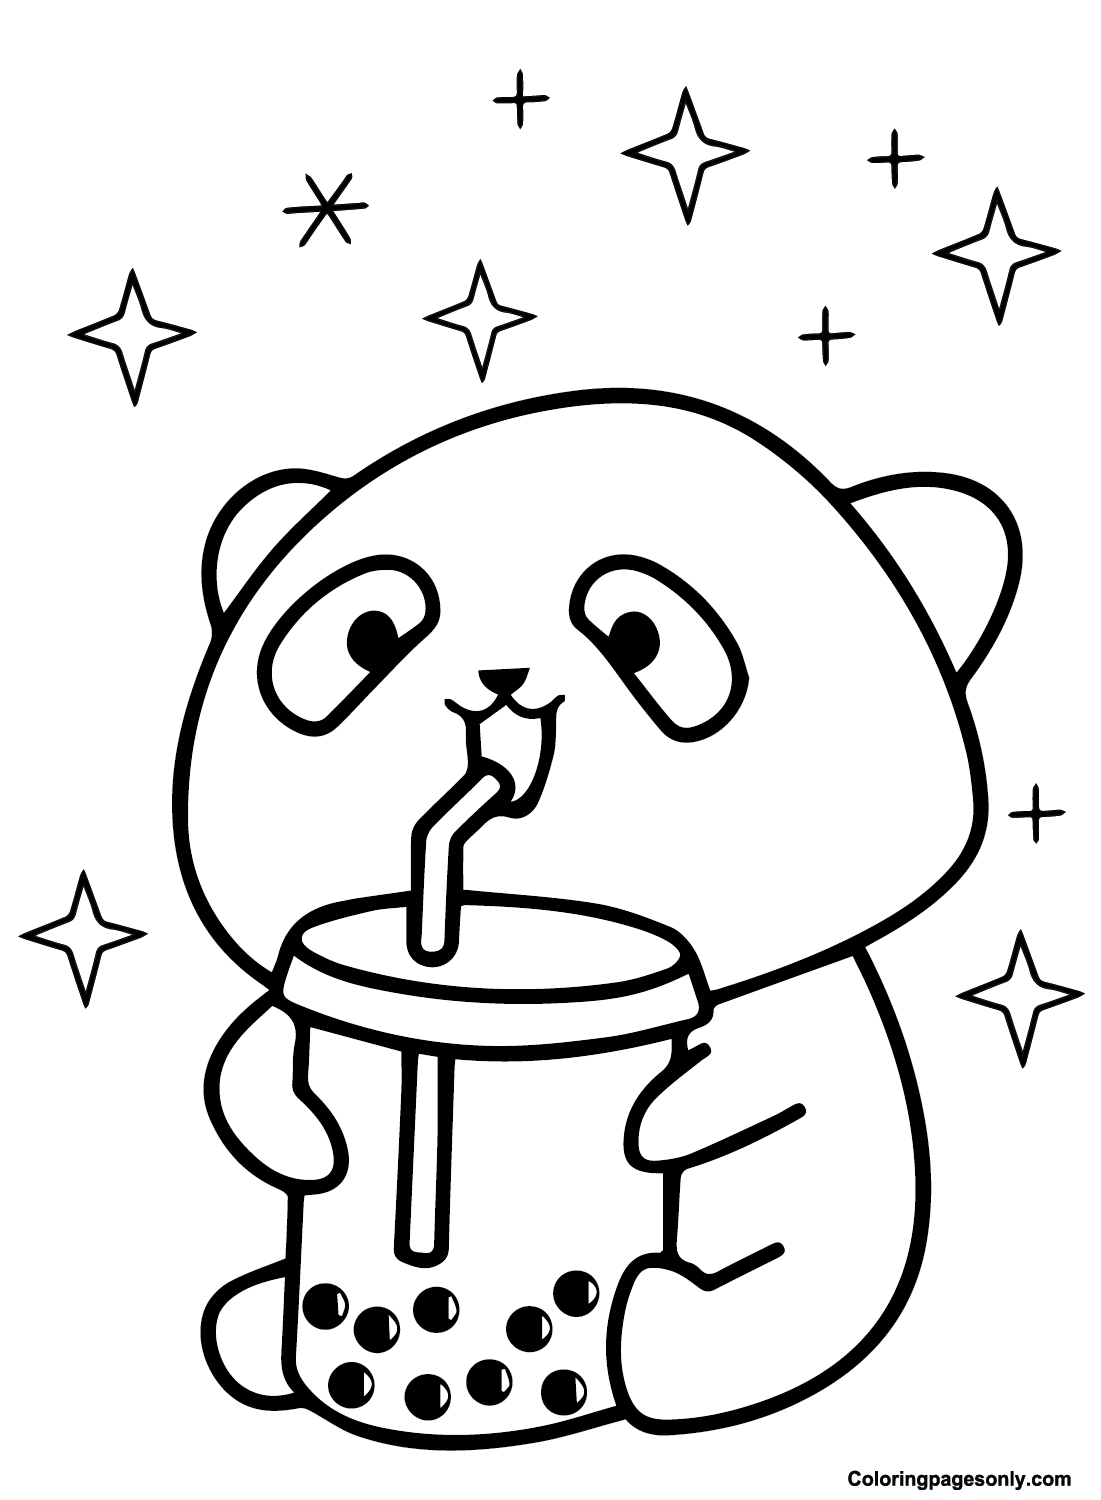 Bear with Boba Tea Coloring Page